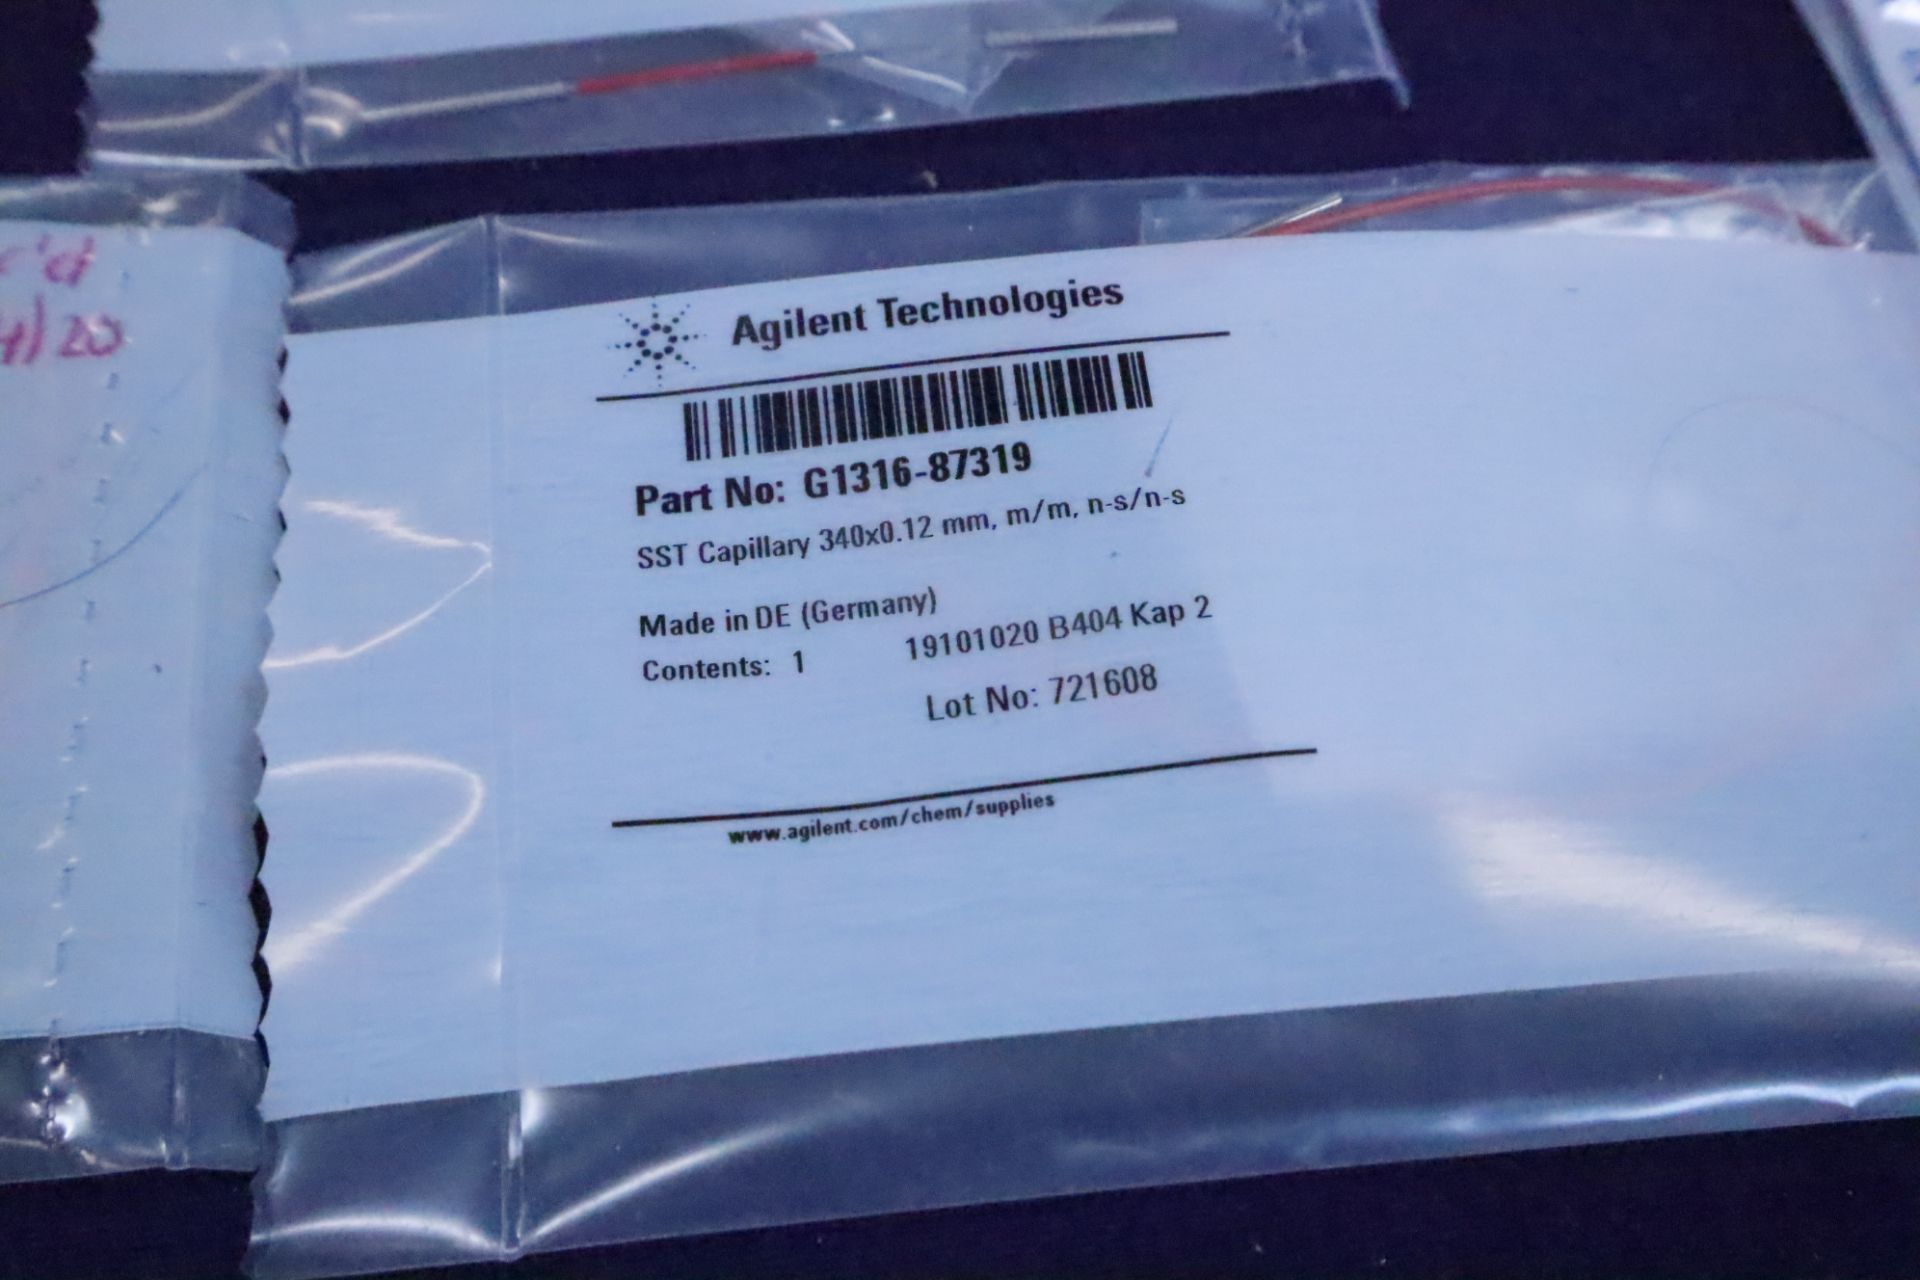 (NIB) Agilent Technologies OEM Replacement Parts for LC/MS Machines - Image 19 of 28